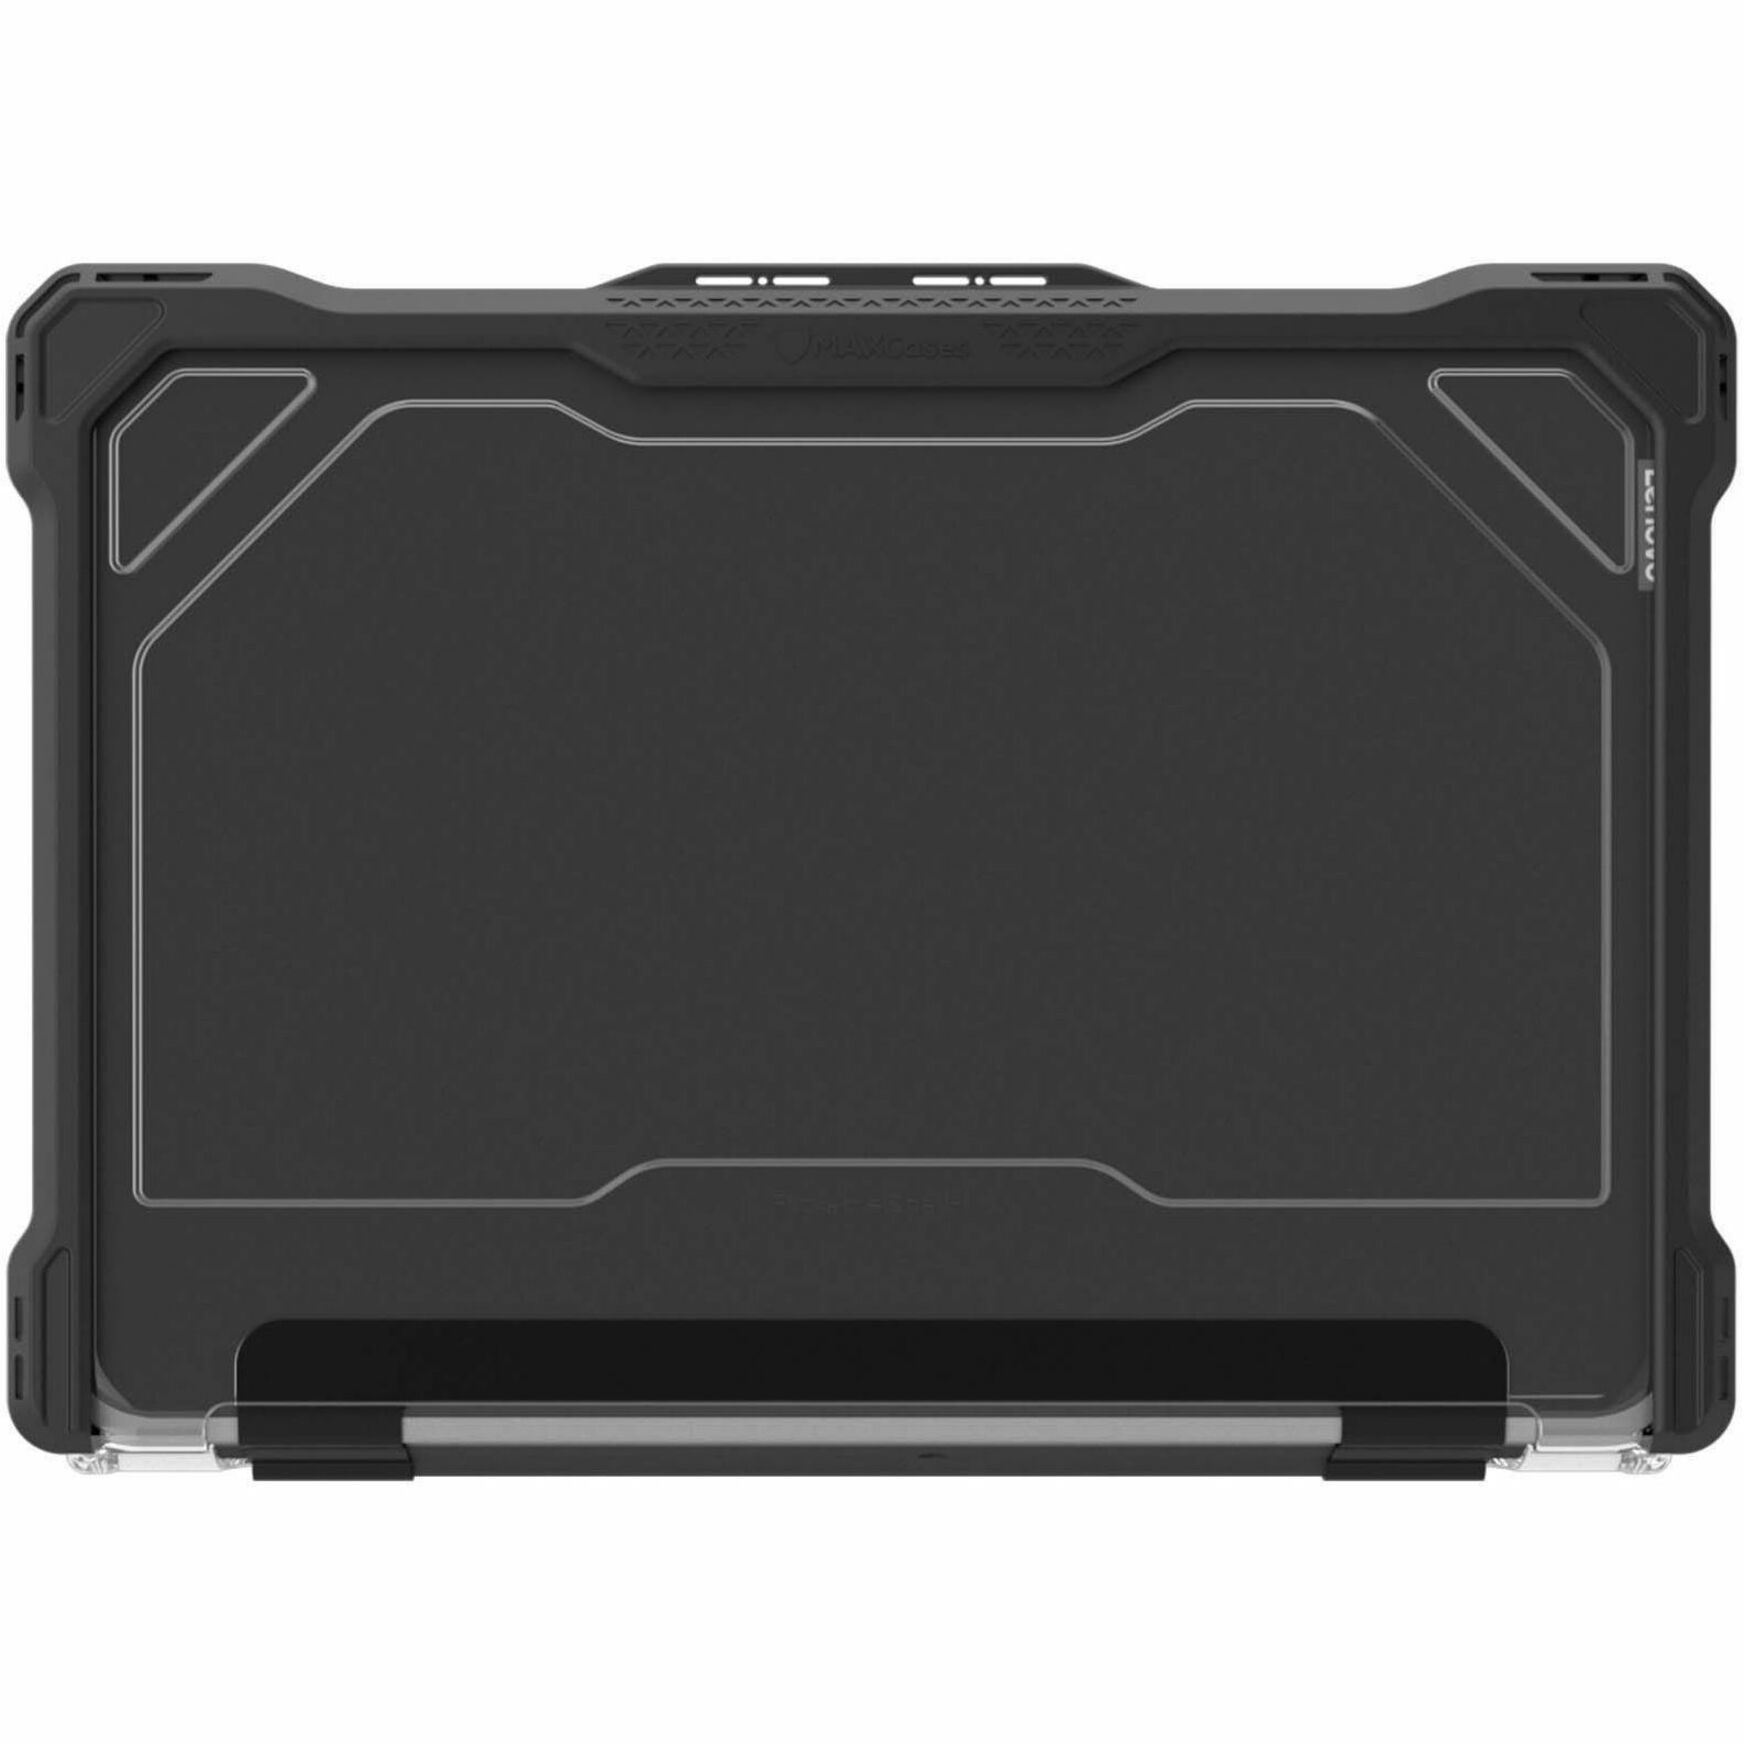 MAXCases Extreme Shell-L Rugged Case for Asus BR1100FKA-XS04T 11.6" Windows 10 (Black) [Discontinued]